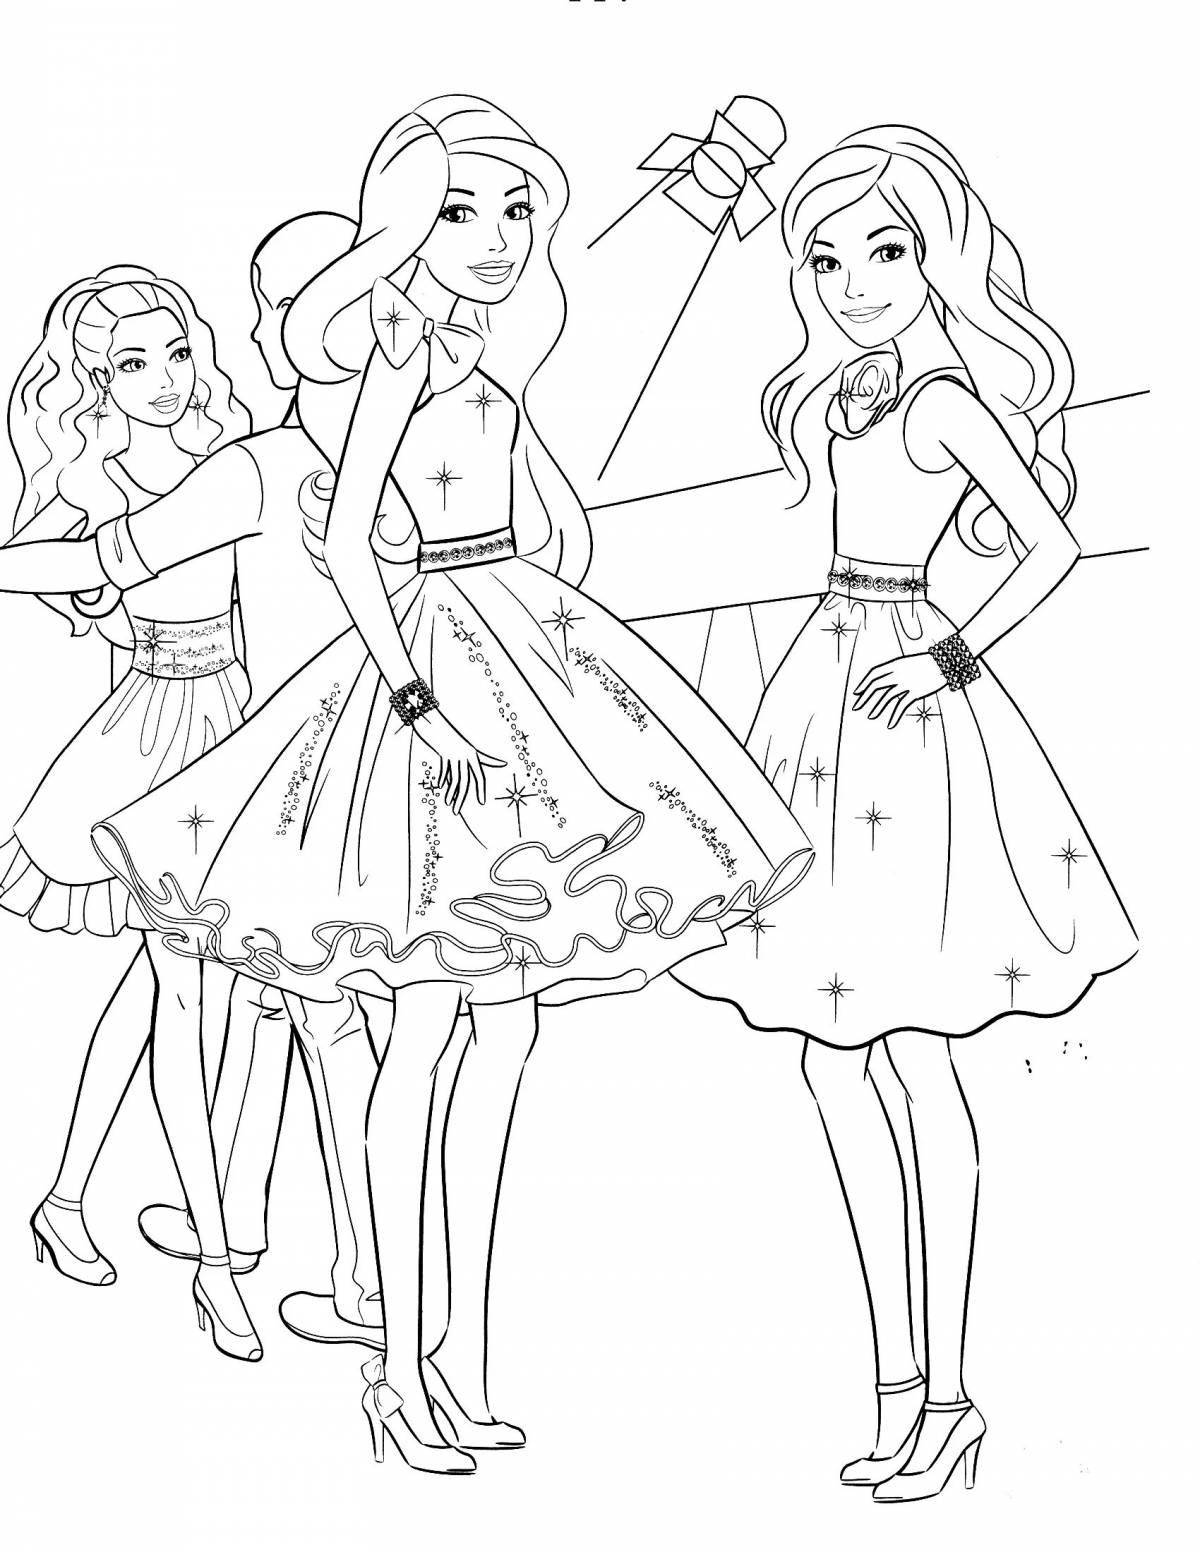 Amazing coloring pages for girl friends